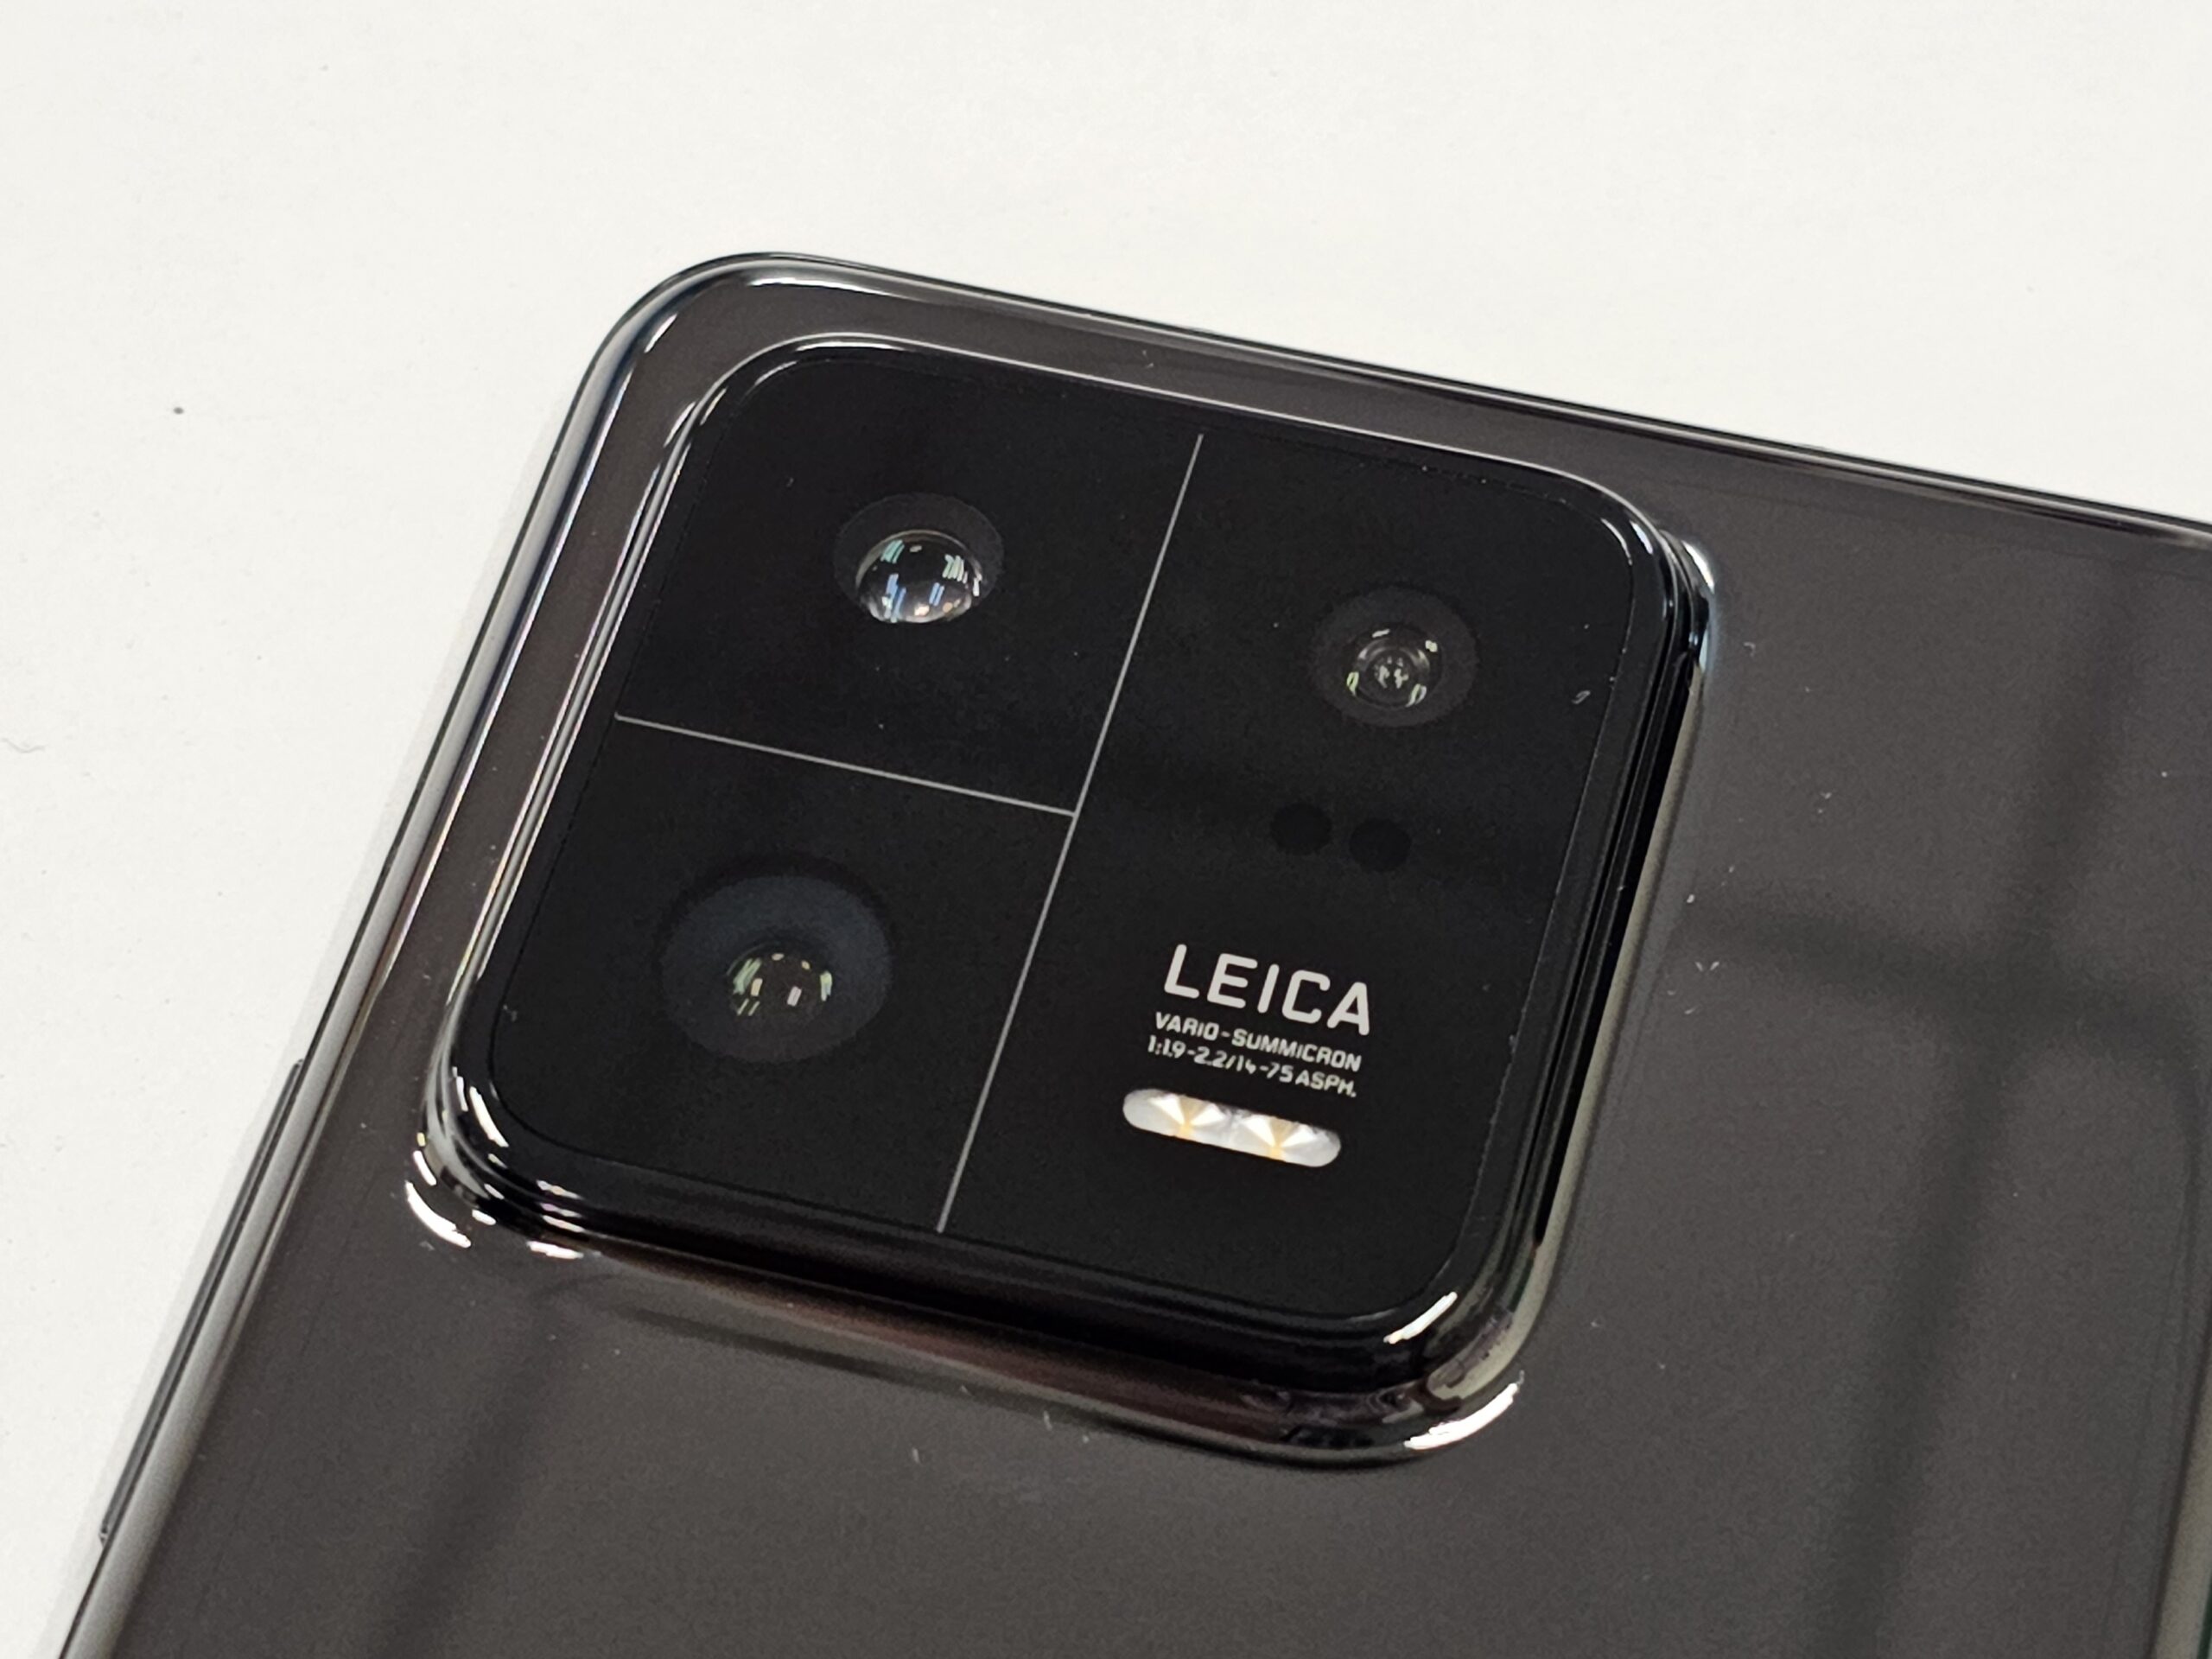 Testing Xiaomi 13 Pro with Leica camera: Not for everyone